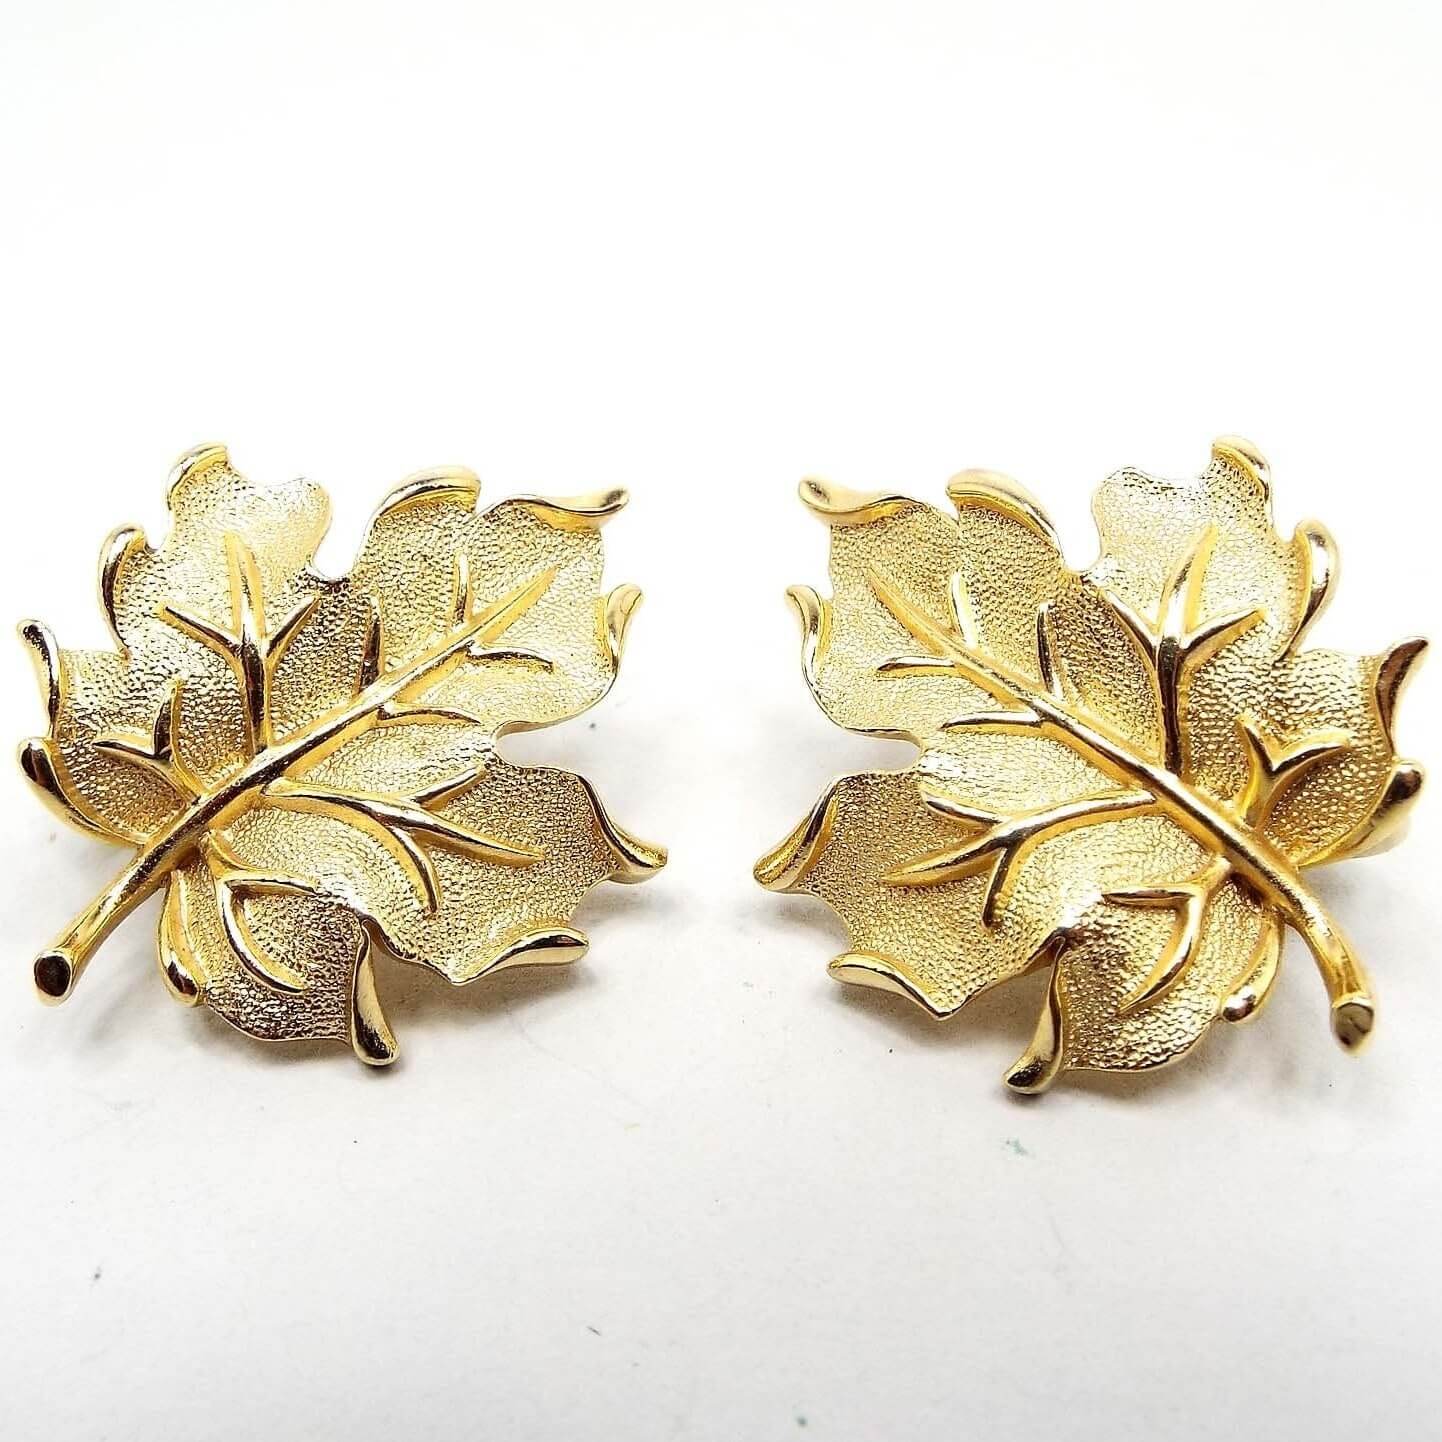 Front view of the retro vintage Crown Trifari leaf clip on earrings. The metal is gold tone in color. They are shaped like maple leaves with brushed matte textured metal on the leaves and shiny gold tone metal on the vein part and edges of the leaves. 